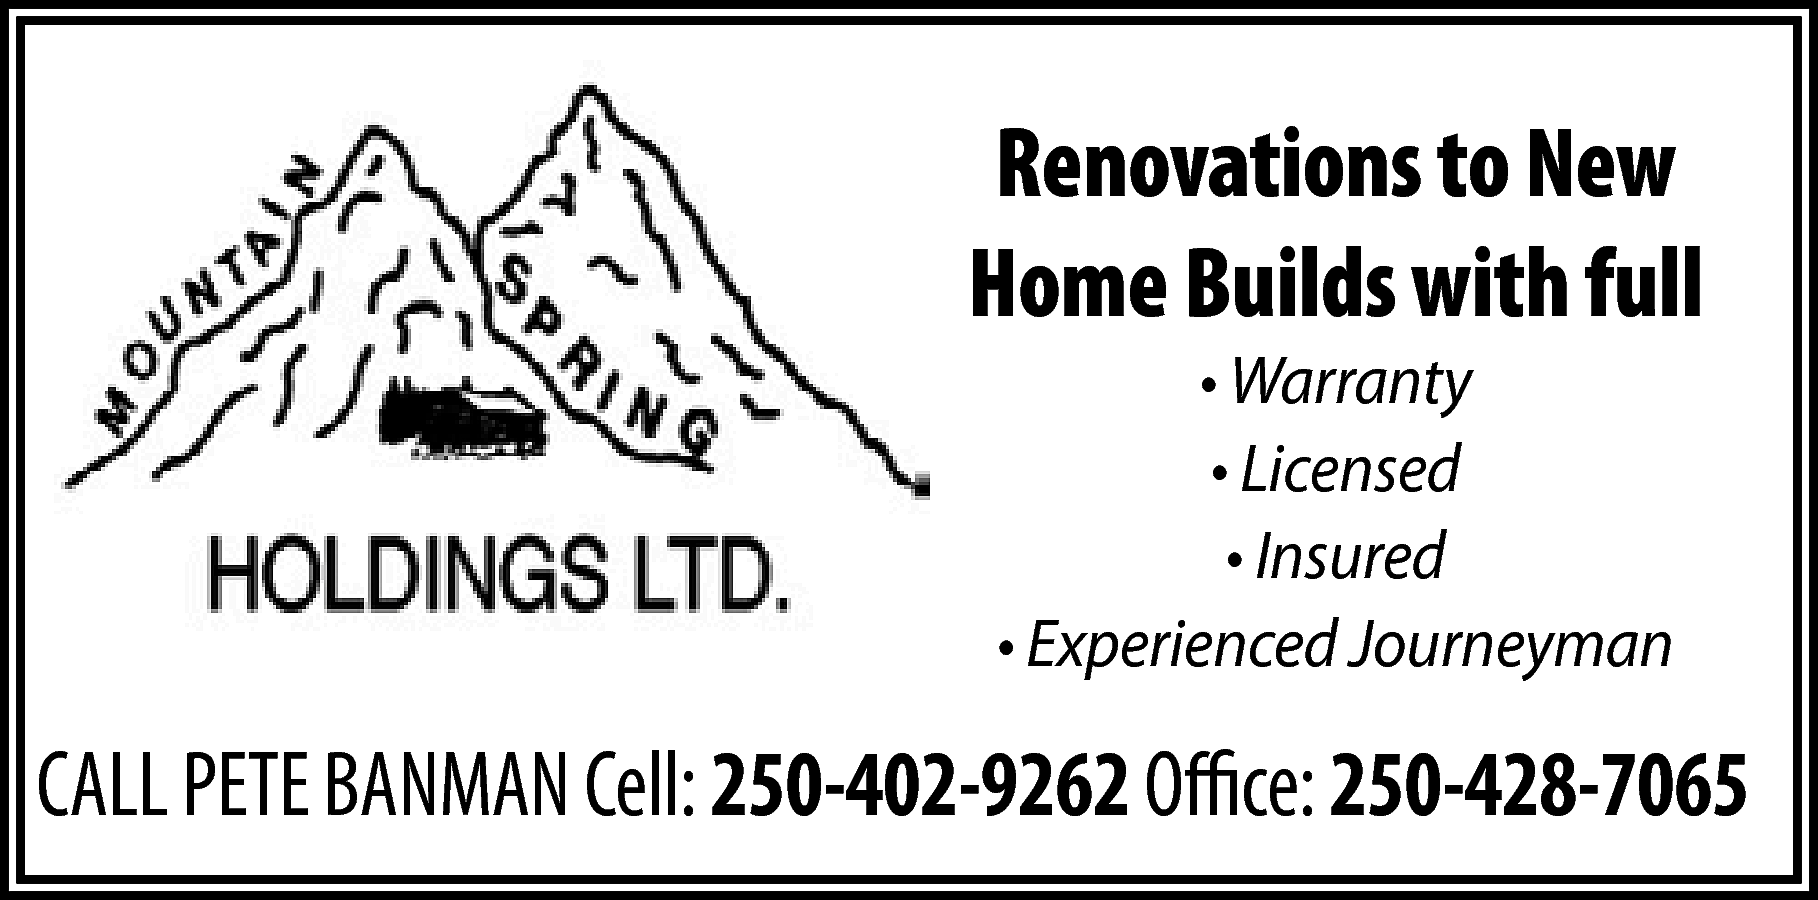 Renovations to New <br>Home Builds  Renovations to New  Home Builds with full  • Warranty  • Licensed  • Insured  • Experienced Journeyman    CALL PETE BANMAN Cell: 250-402-9262 Office: 250-428-7065    